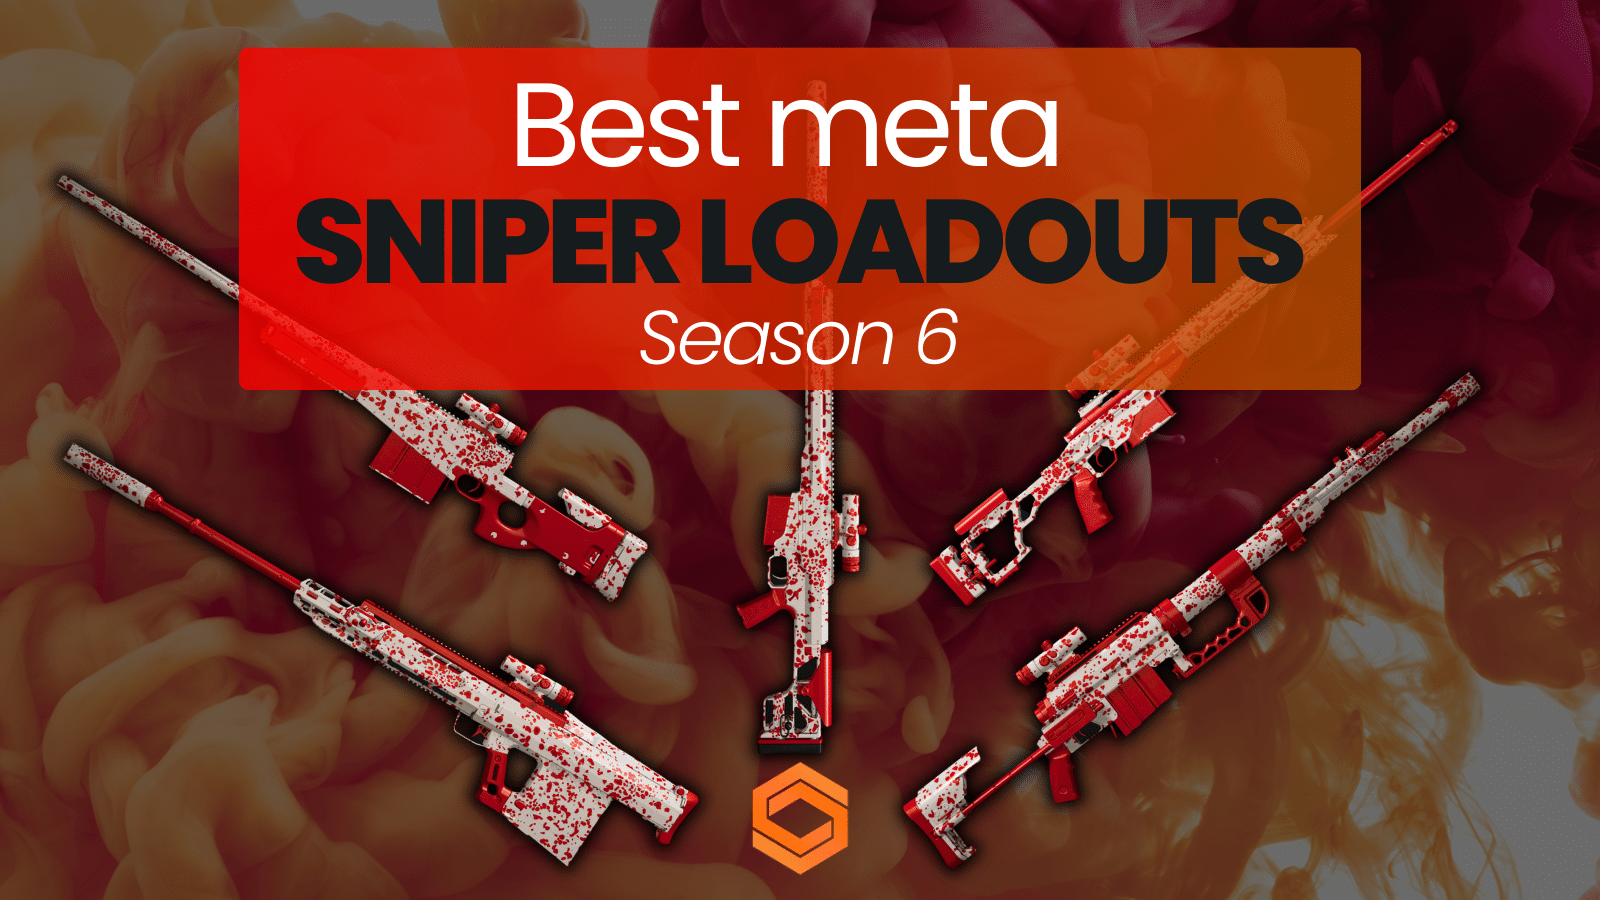 The best Sniper loadouts in Warzone season 6 - one shot builds and meta for Ranked play!